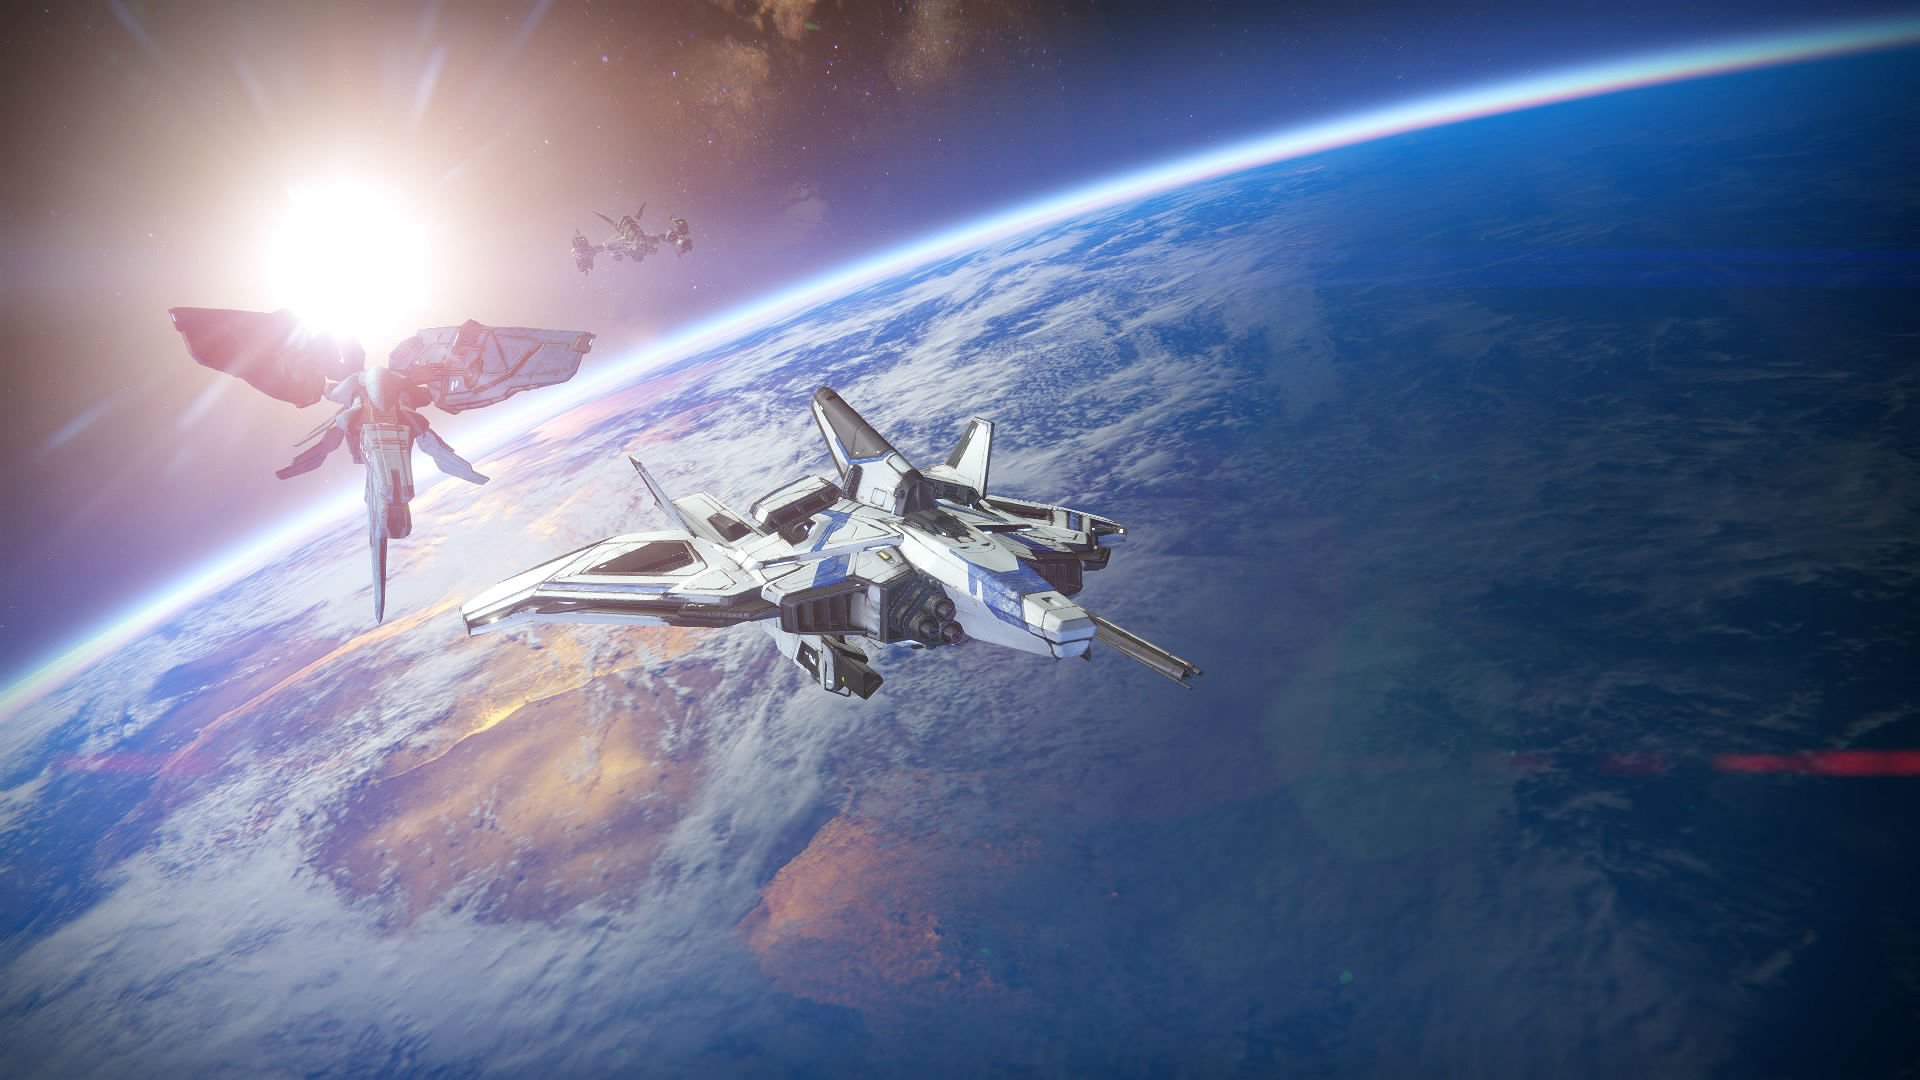 destiny, Sci fi, Shooter, Fps, Action, Fighting, Futuristic, Warrior, Fantasy, Mmo, Online, Rpg, Spaceship Wallpaper